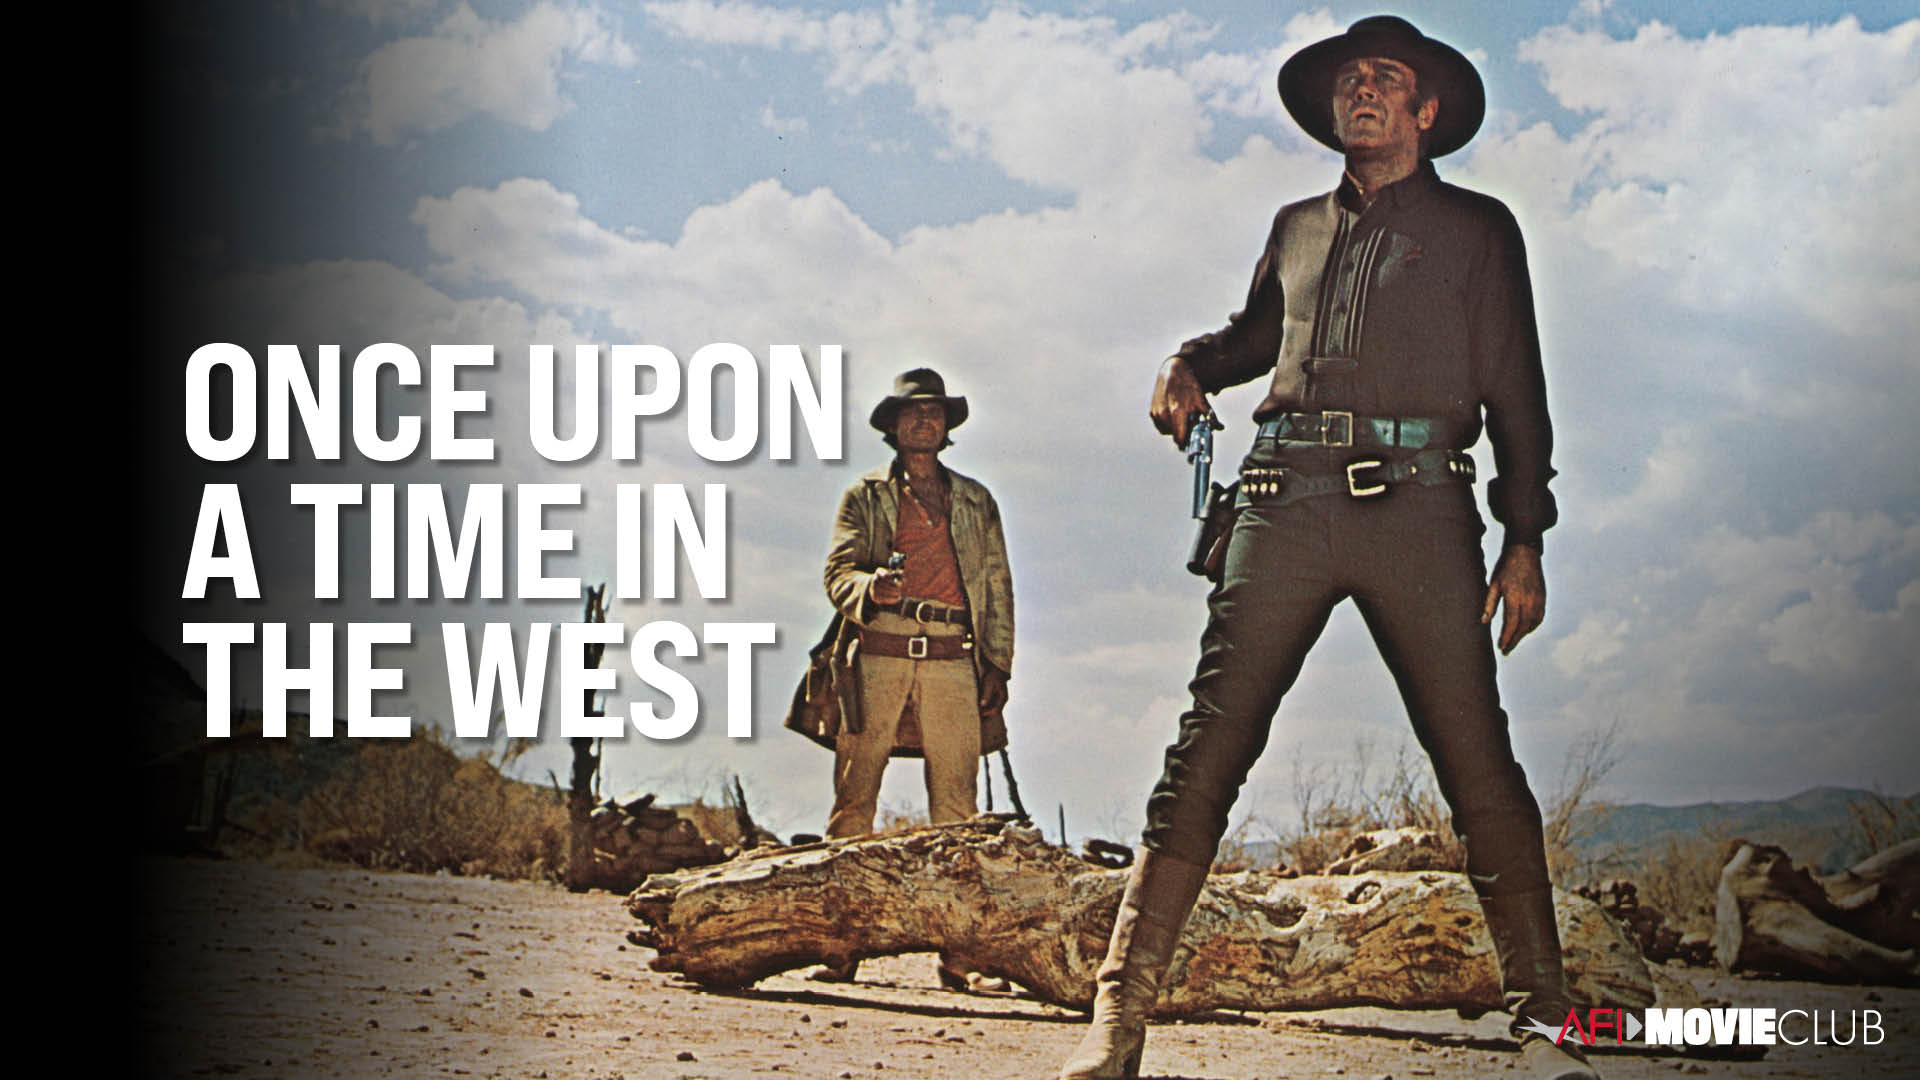 ONCE UPON A TIME IN THE WEST Film Still - Henry Fonda and Charles Bronson